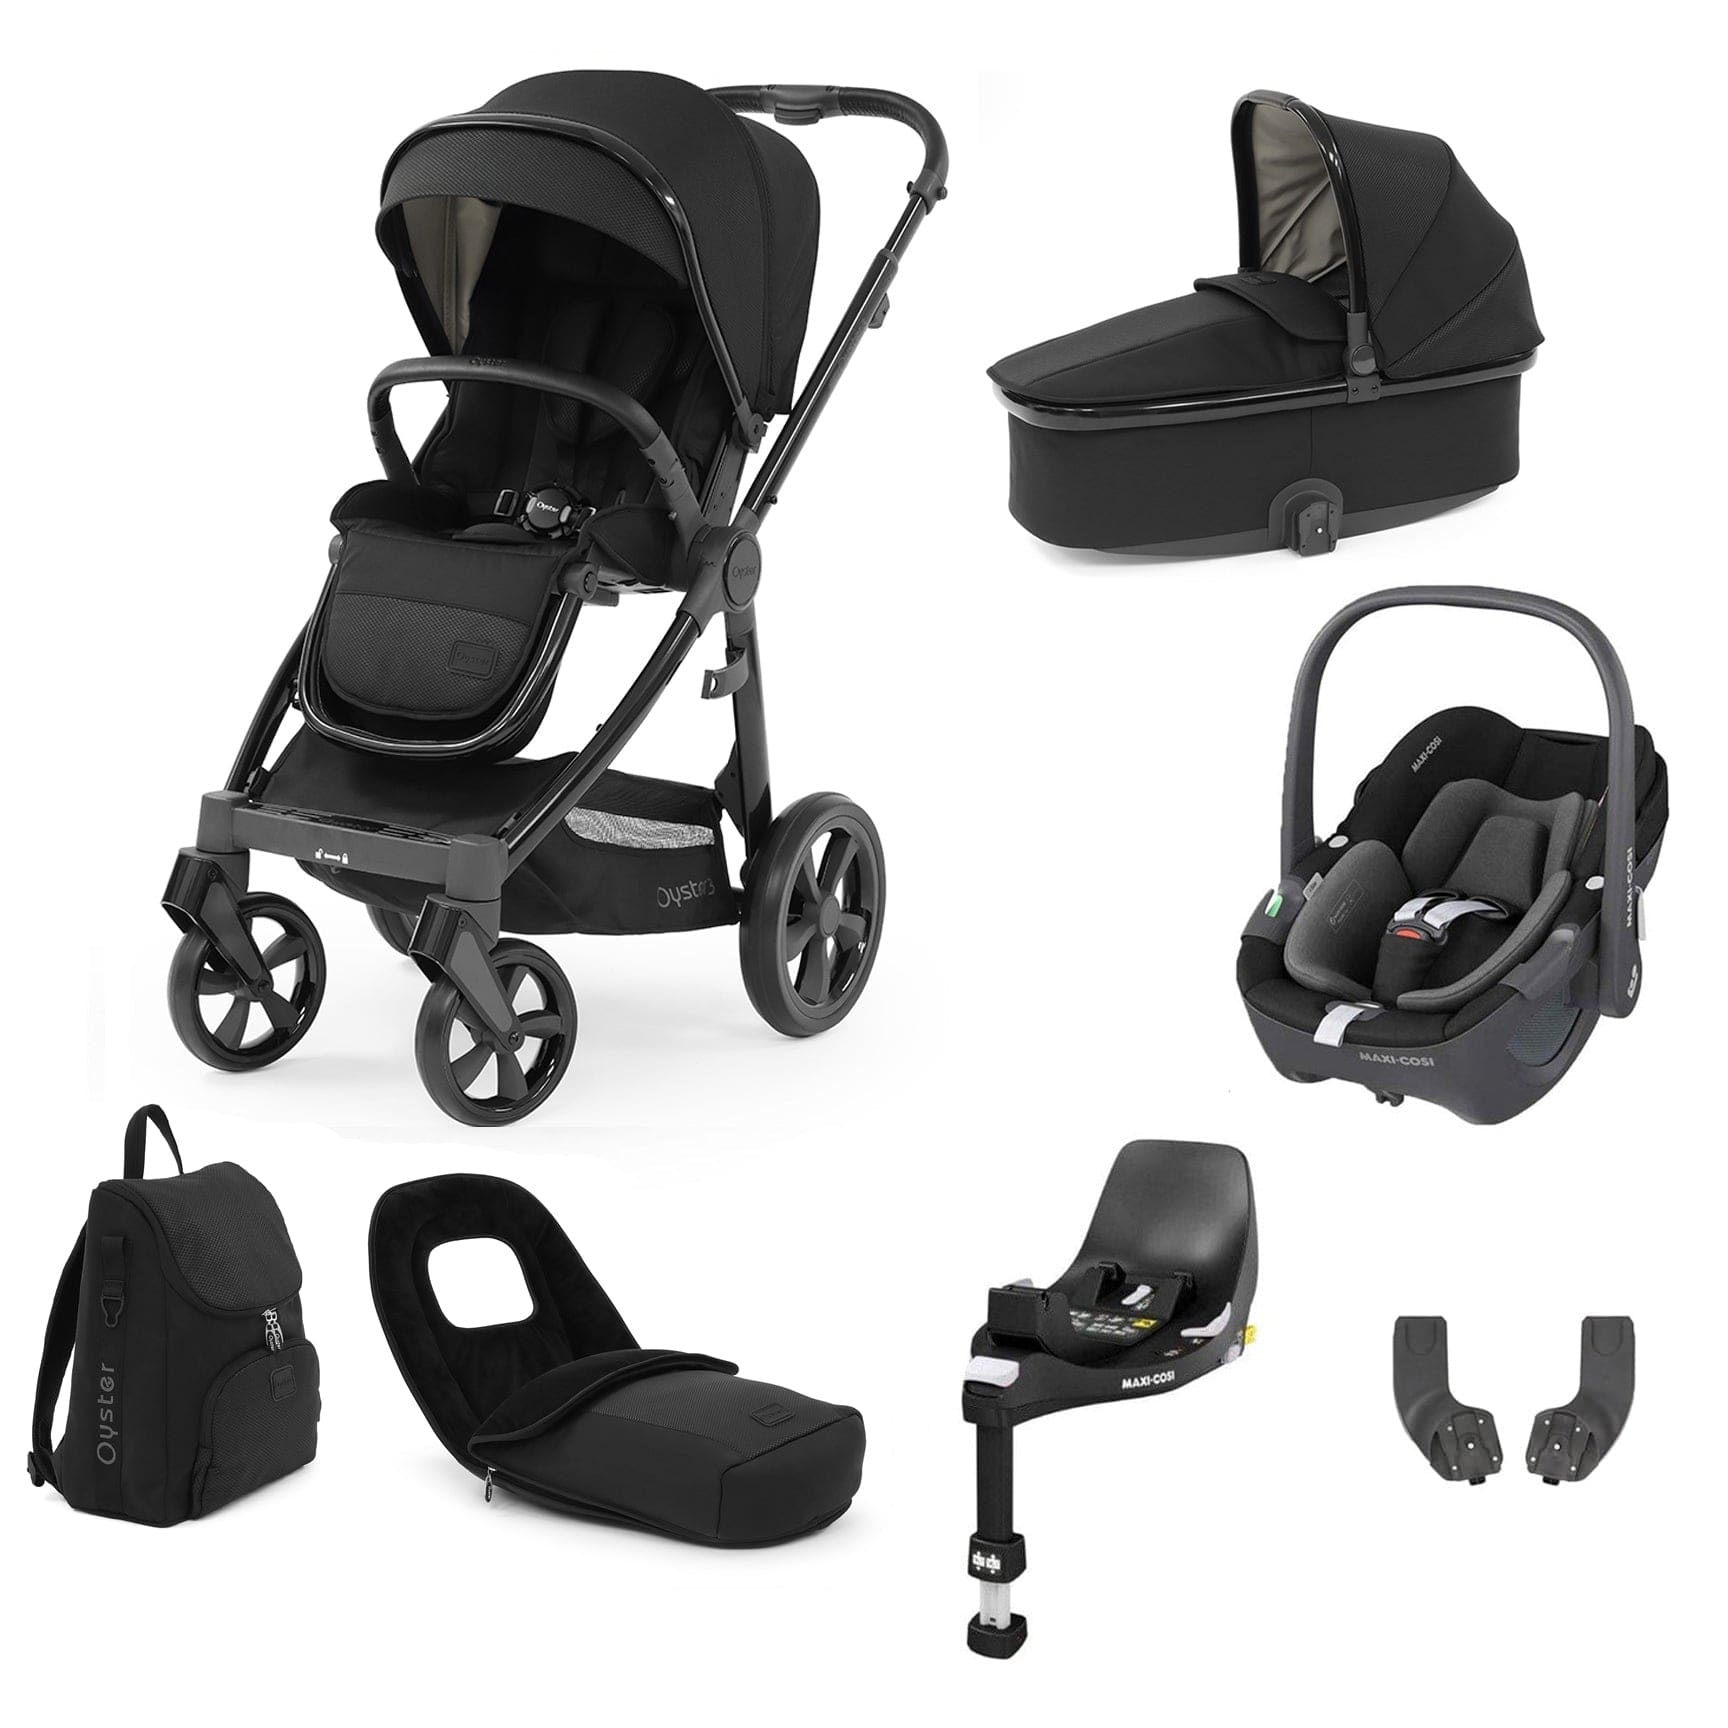 Babystyle Oyster 3 Luxury 7 Piece with Car Seat Bundle in Pixel Travel Systems 14808-PXL 5060711565668